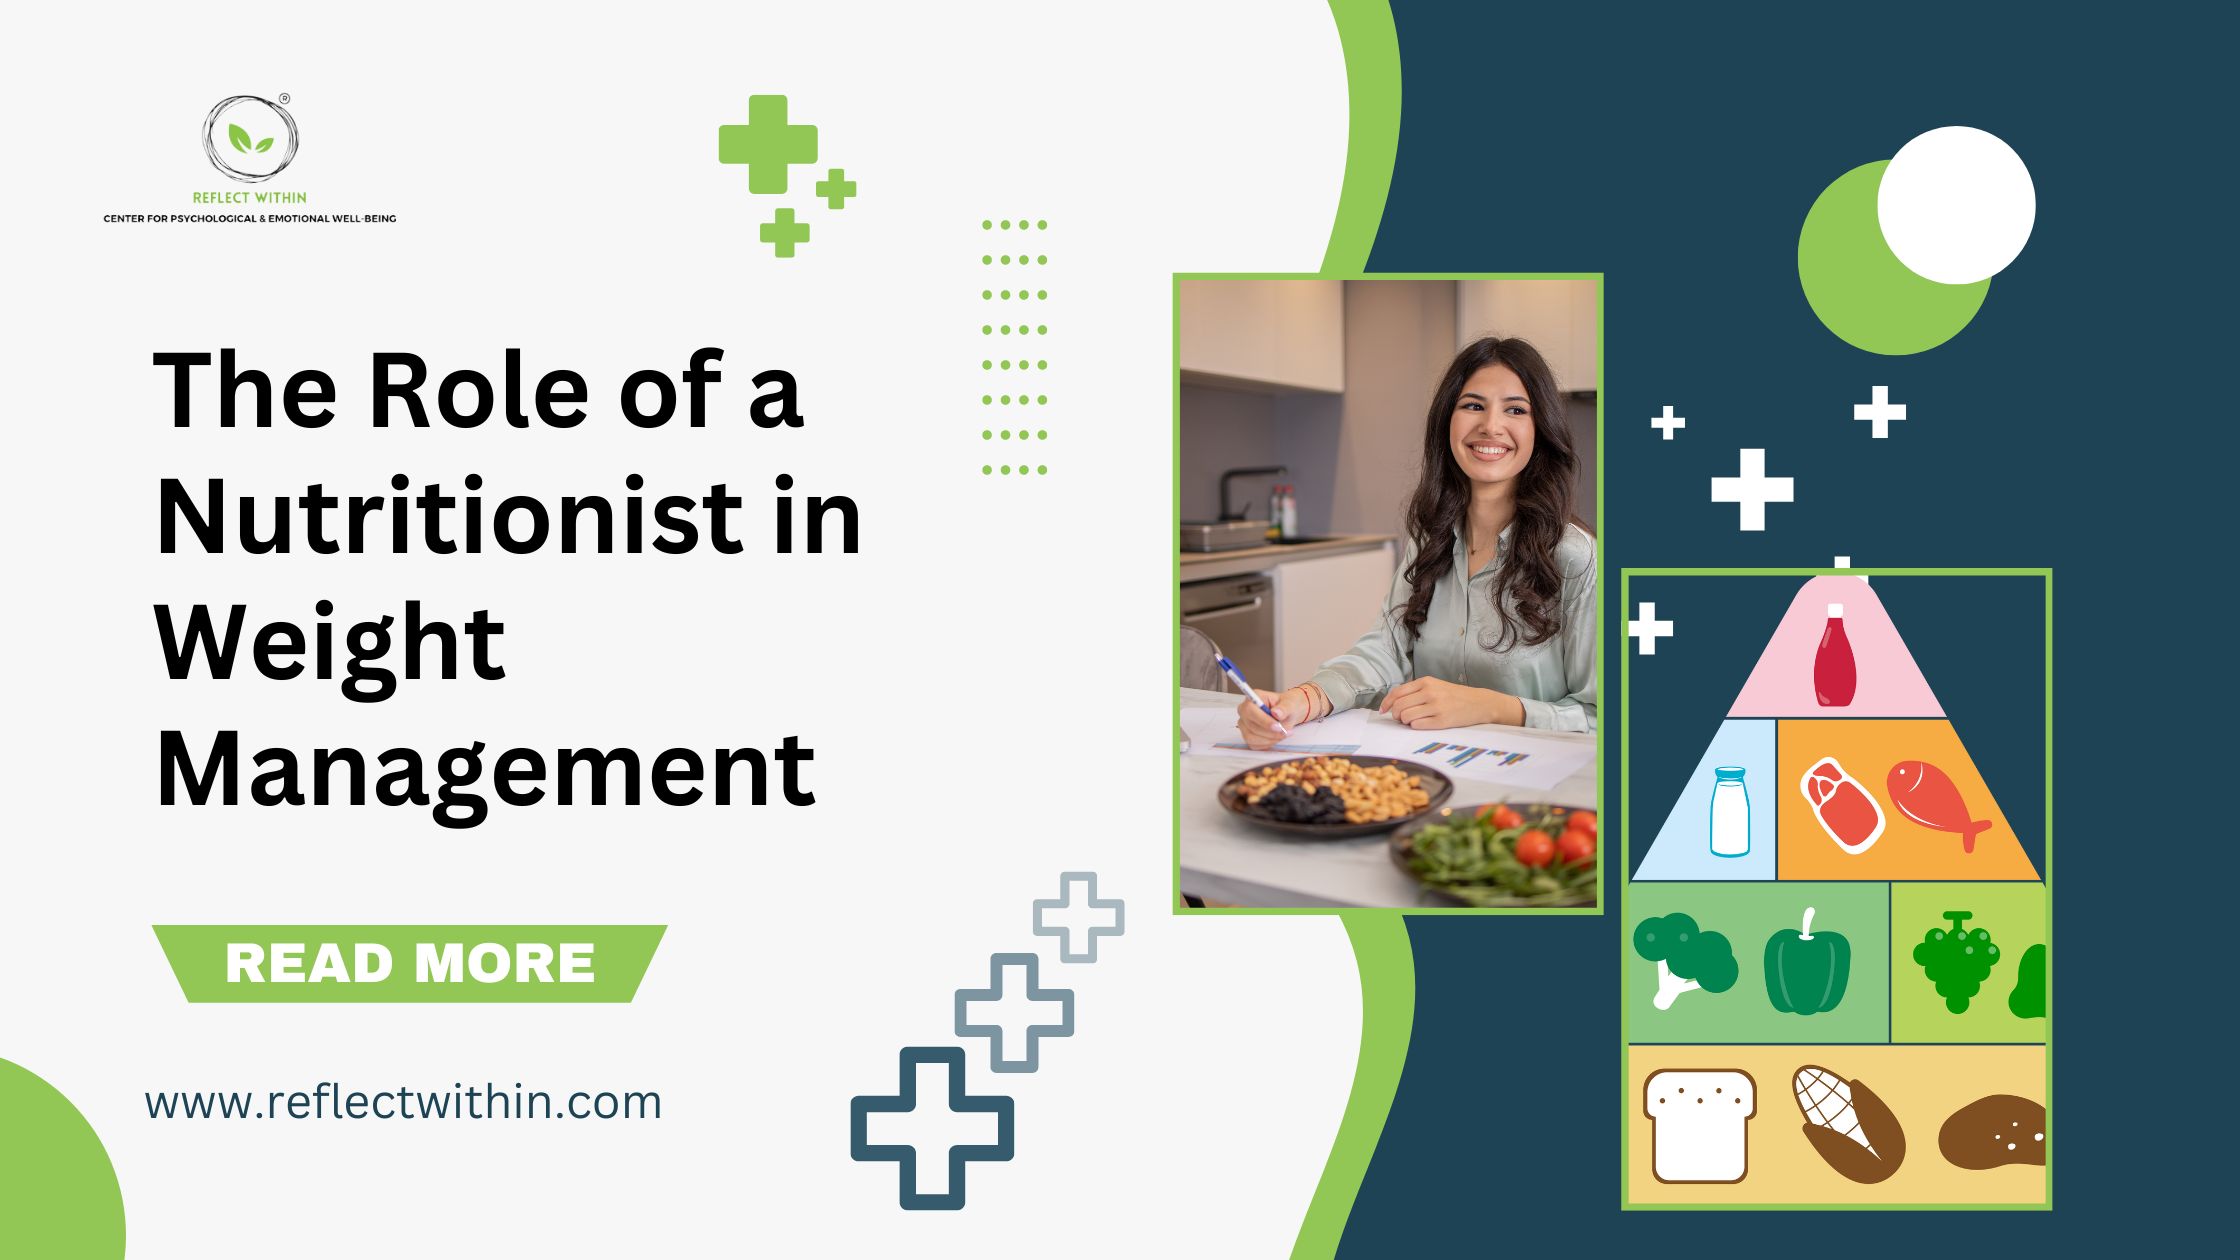 The Role of a Nutritionist in Weight Management